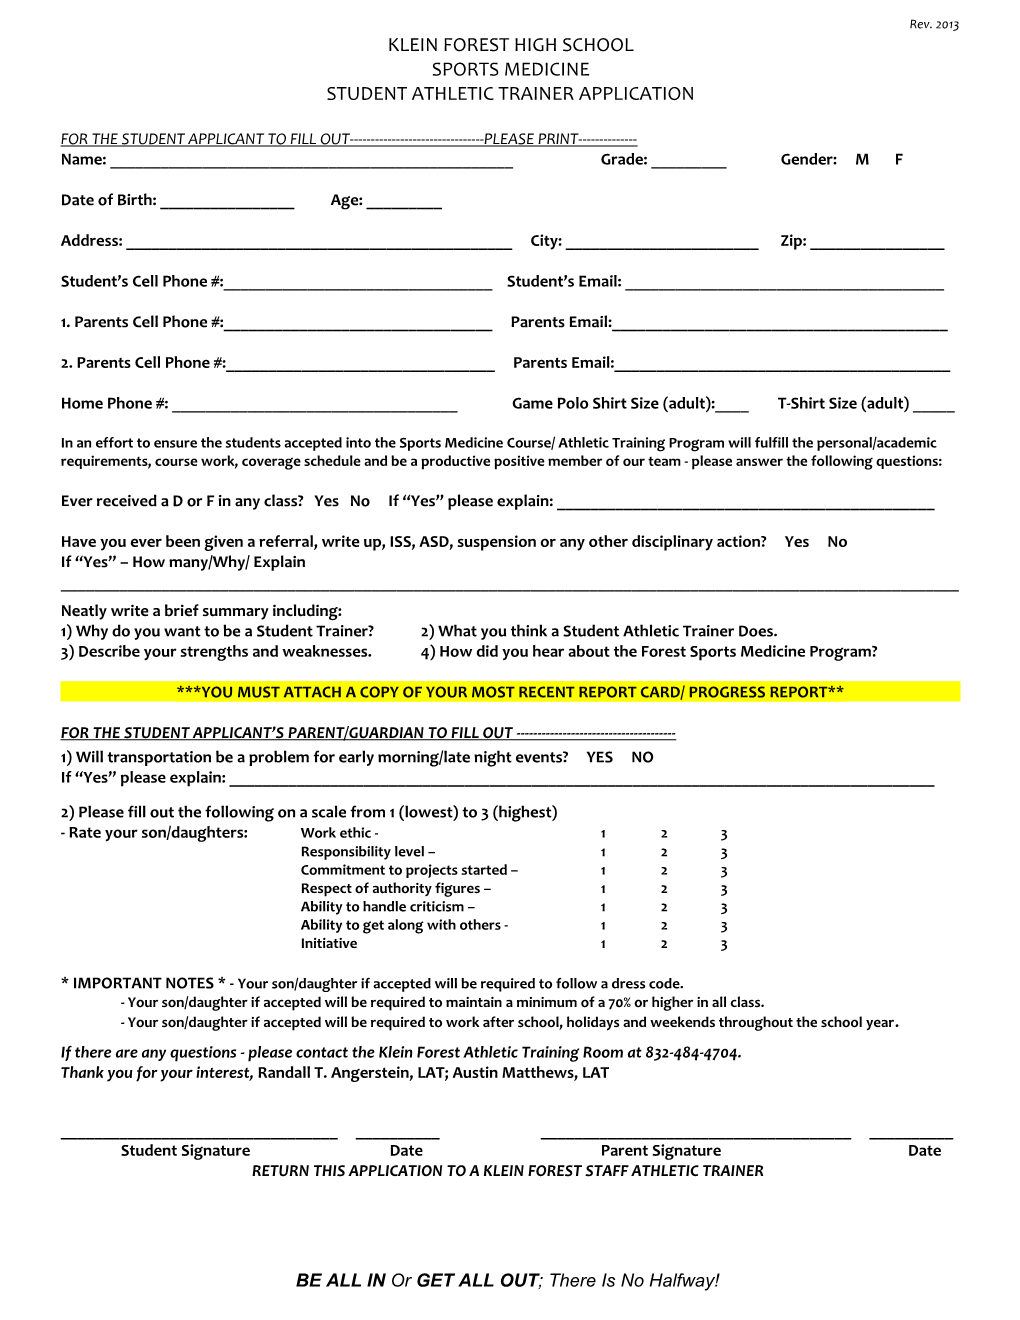 Student Trainer Application